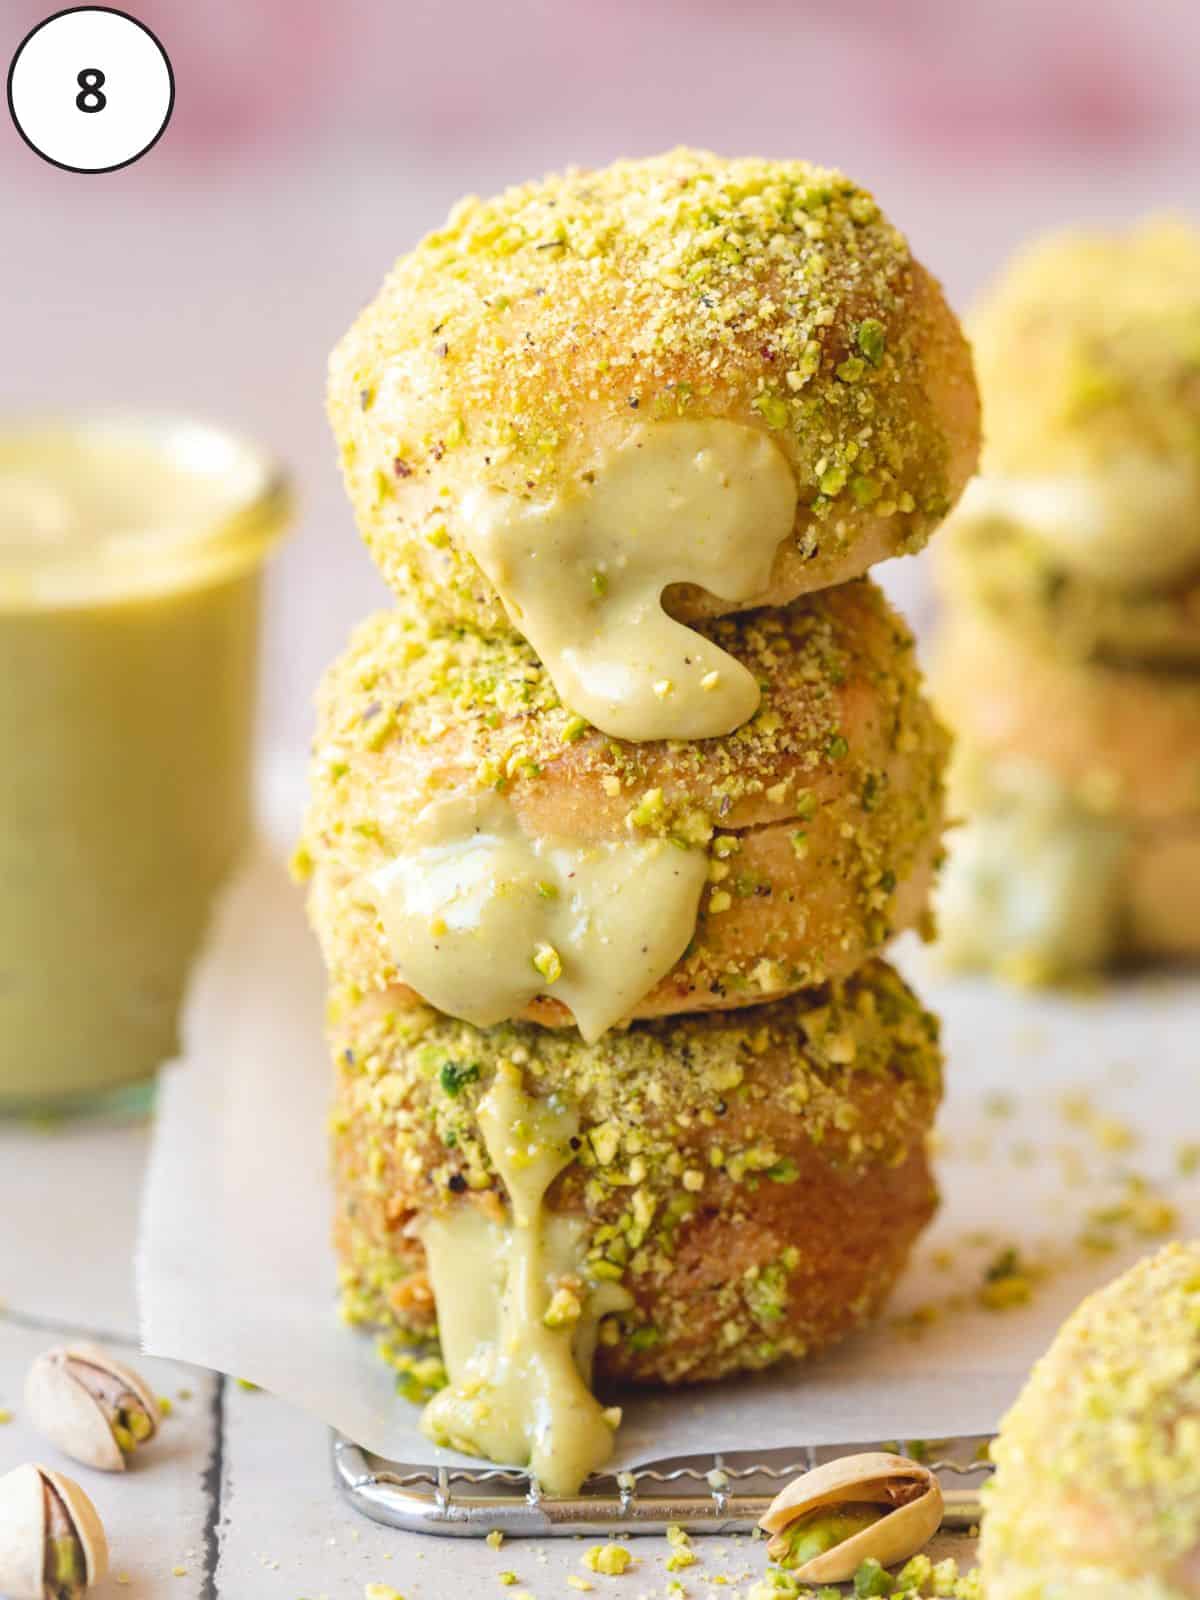 vegan donuts rolled in pistachio and filled with pistachio pastry cream in a lined glass pan.